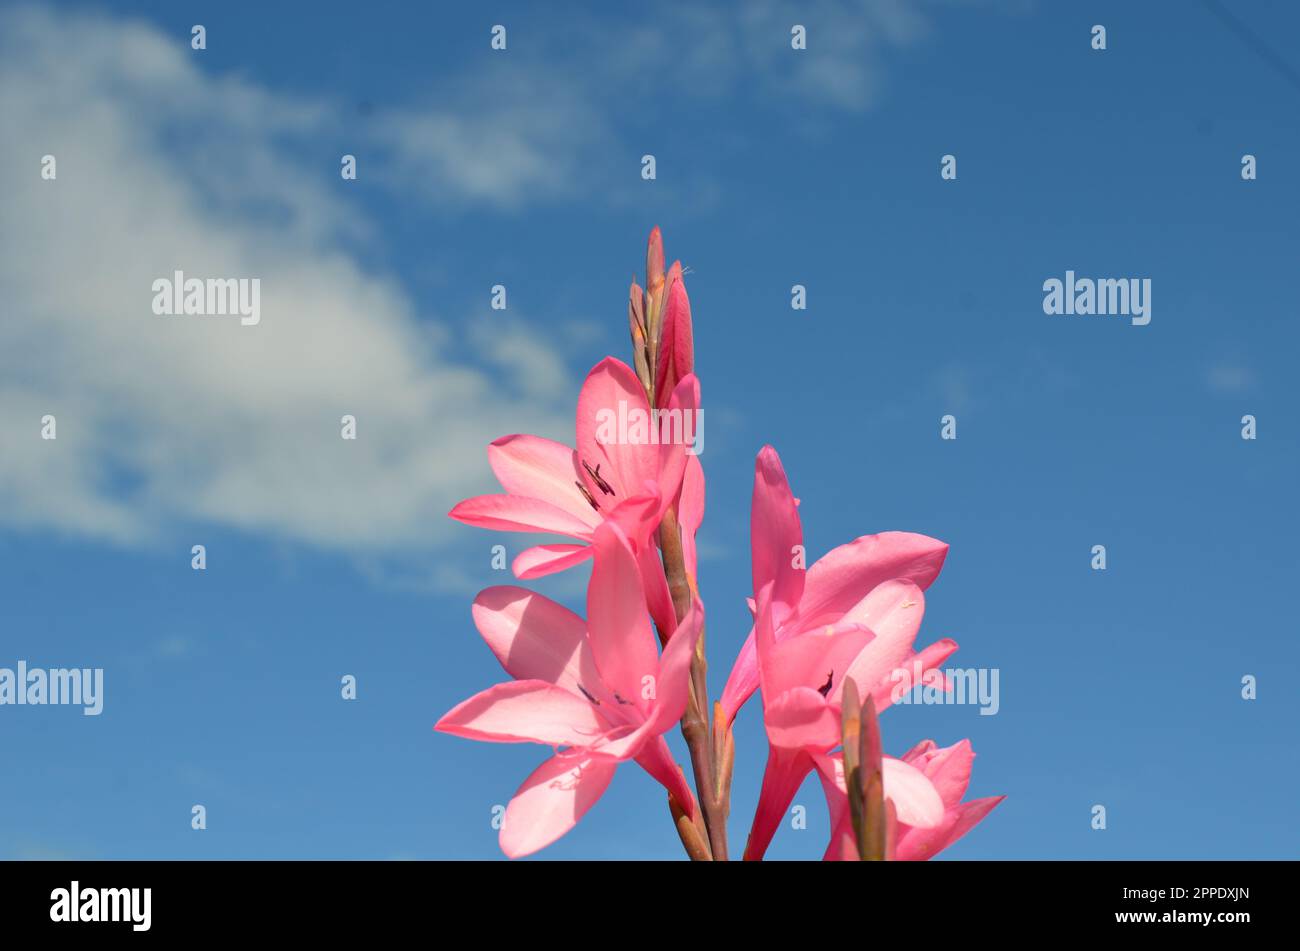 Pink Wildflowers With Blue Sky Background. Stock Photo